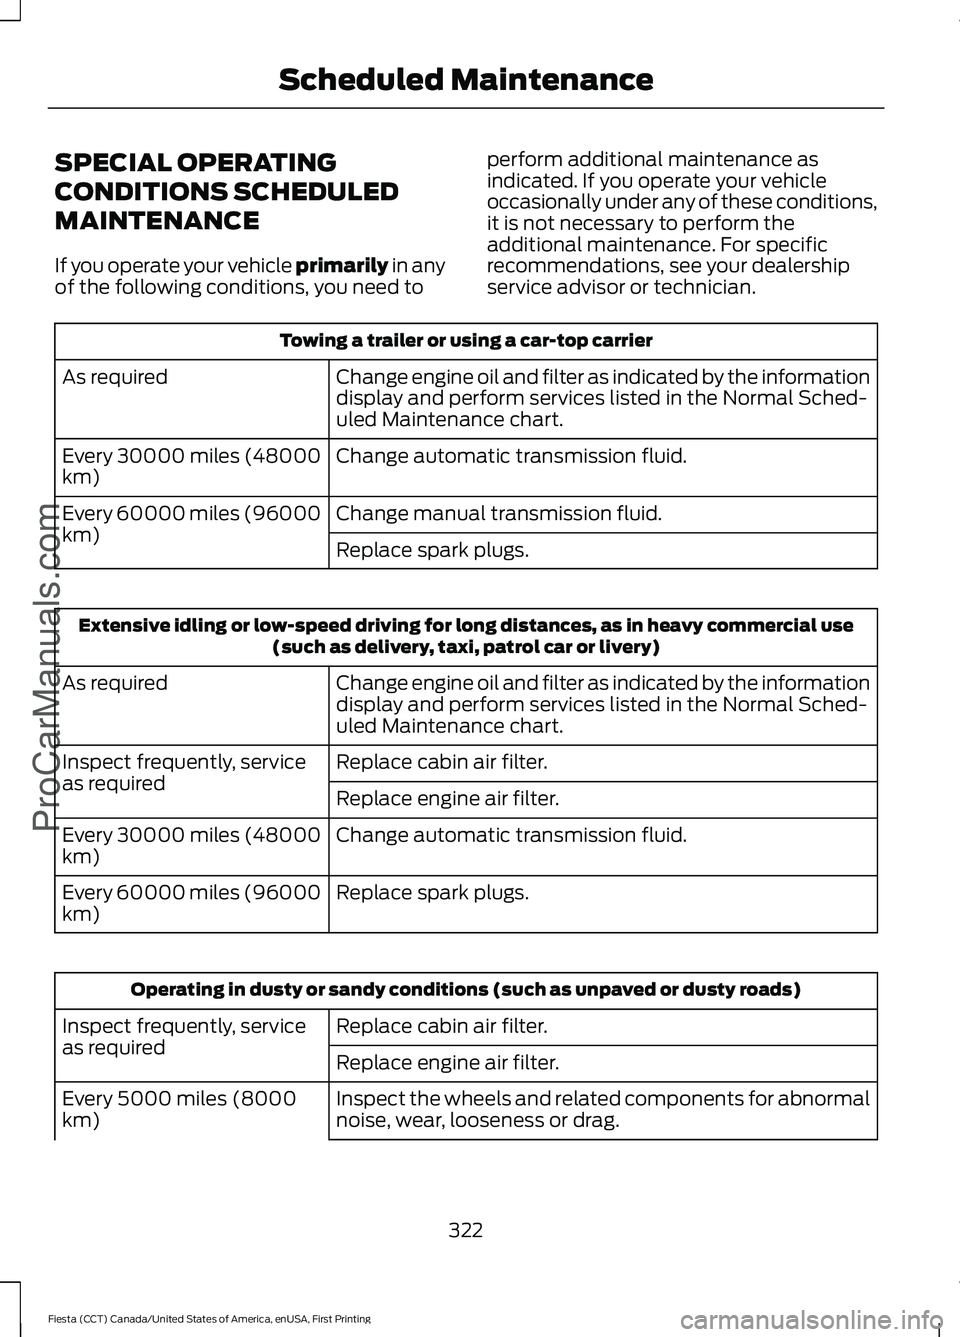 FORD FIESTA 2016  Owners Manual SPECIAL OPERATING
CONDITIONS SCHEDULED
MAINTENANCE
If you operate your vehicle primarily in any
of the following conditions, you need to perform additional maintenance as
indicated. If you operate you